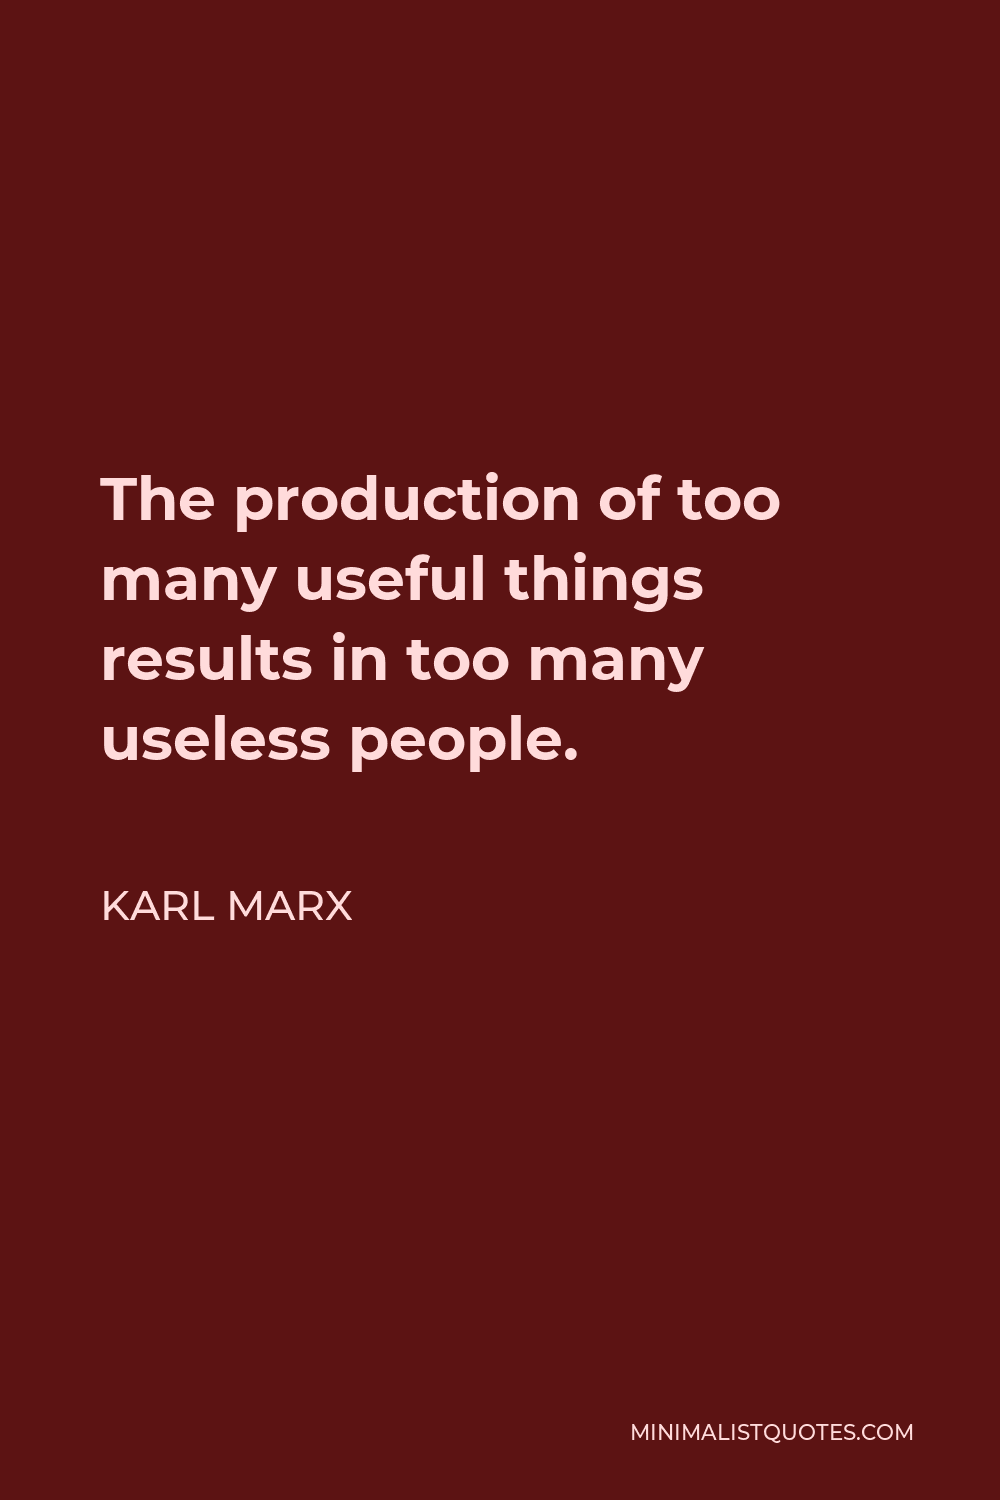 Karl Marx Quote - The production of too many useful things results in too many useless people.